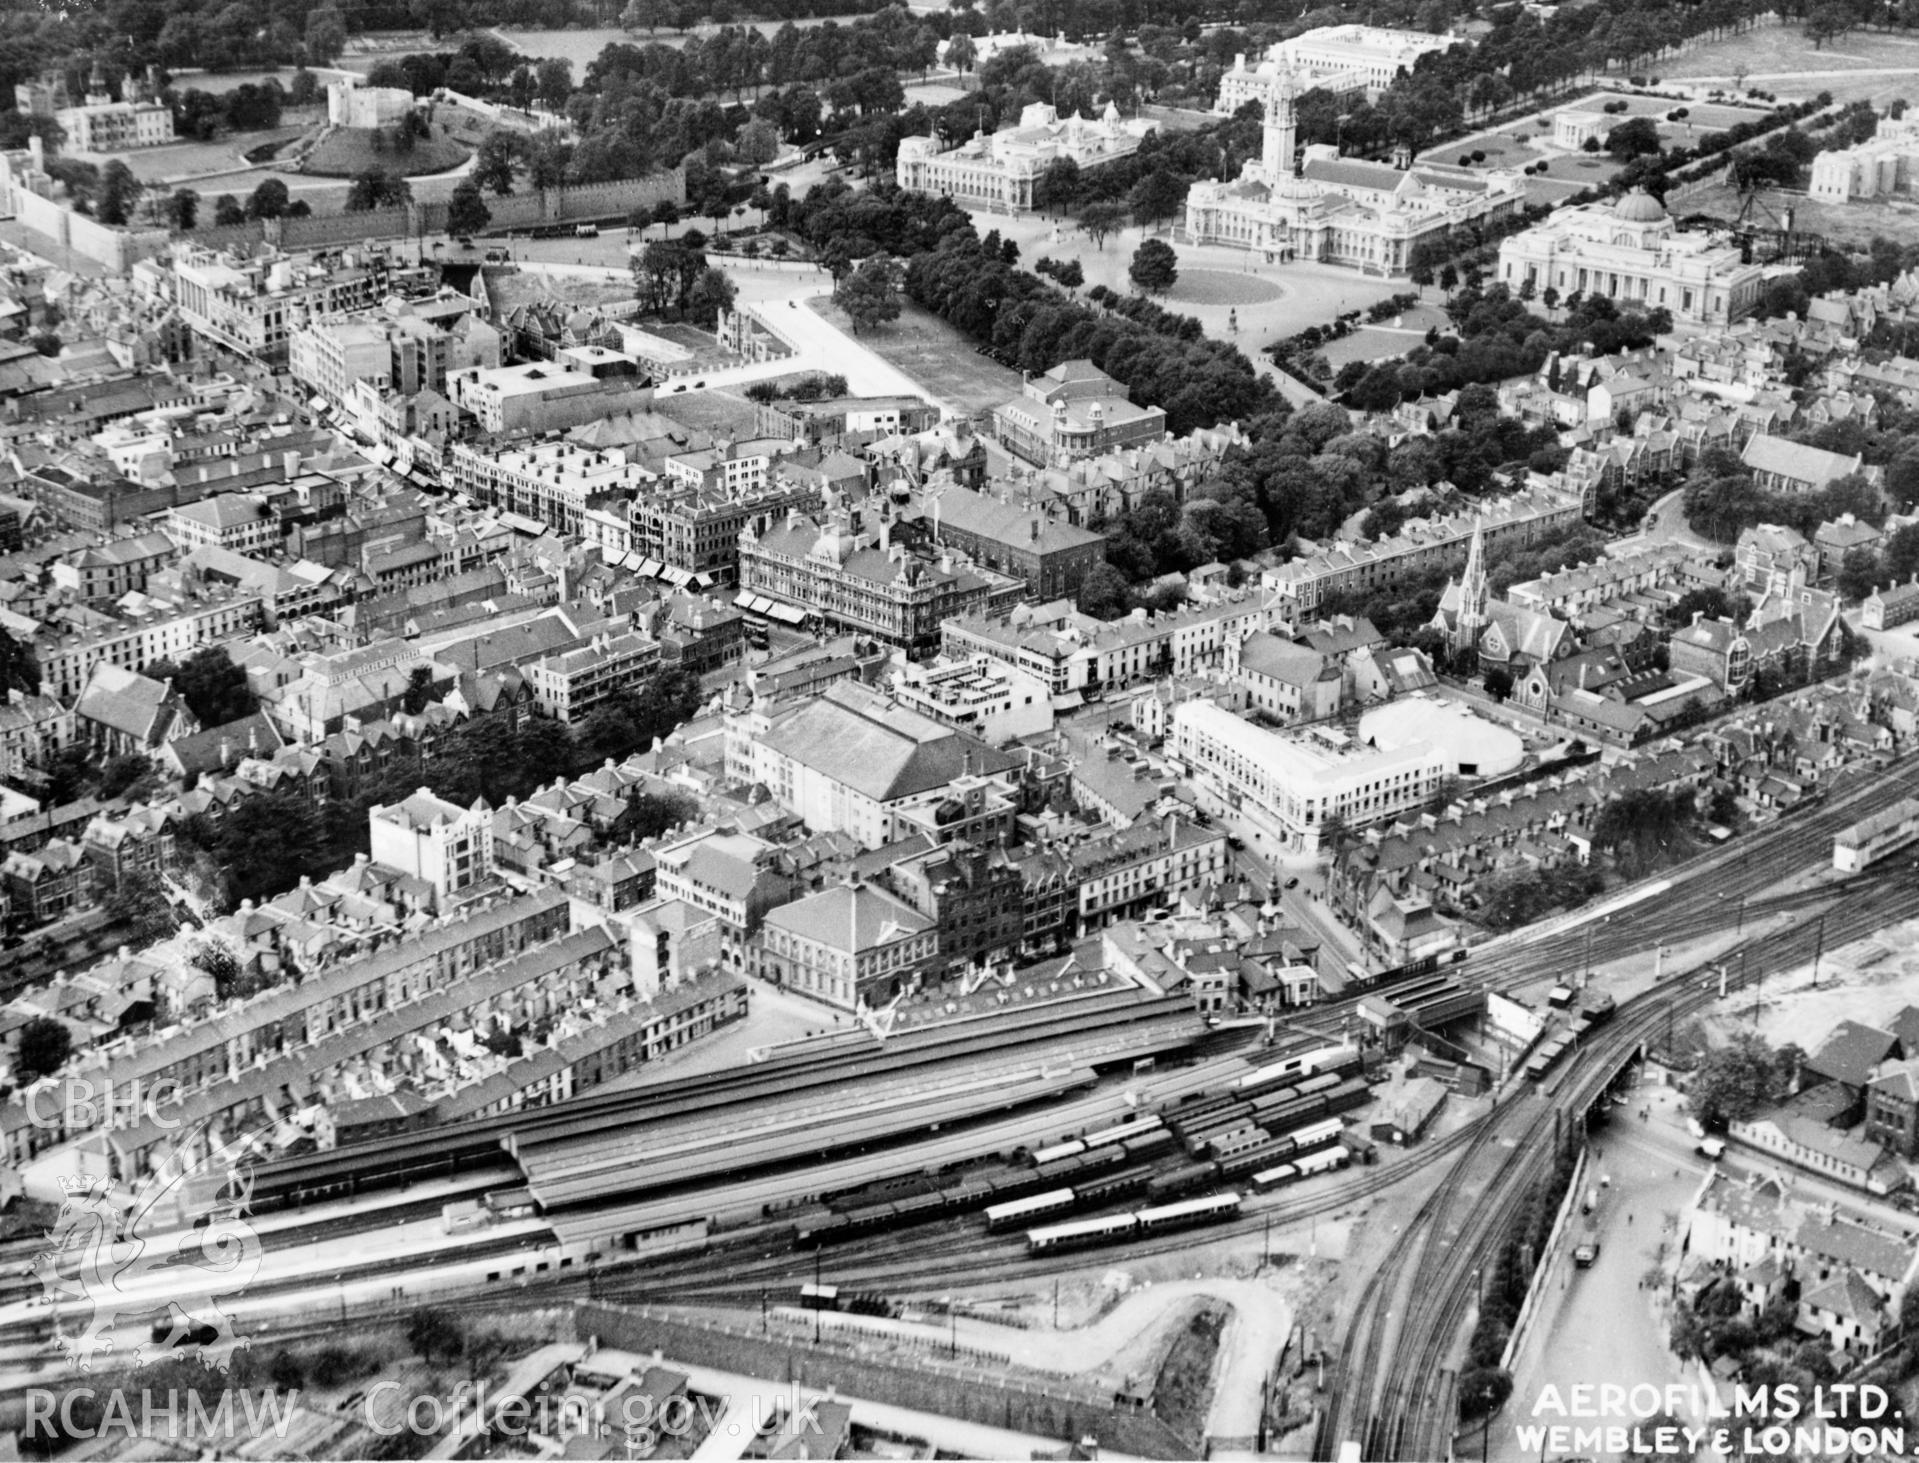 View of central Cardiff showing station, civic buildings and Queen Street. Oblique aerial photograph, 5?x4? BW glass plate.